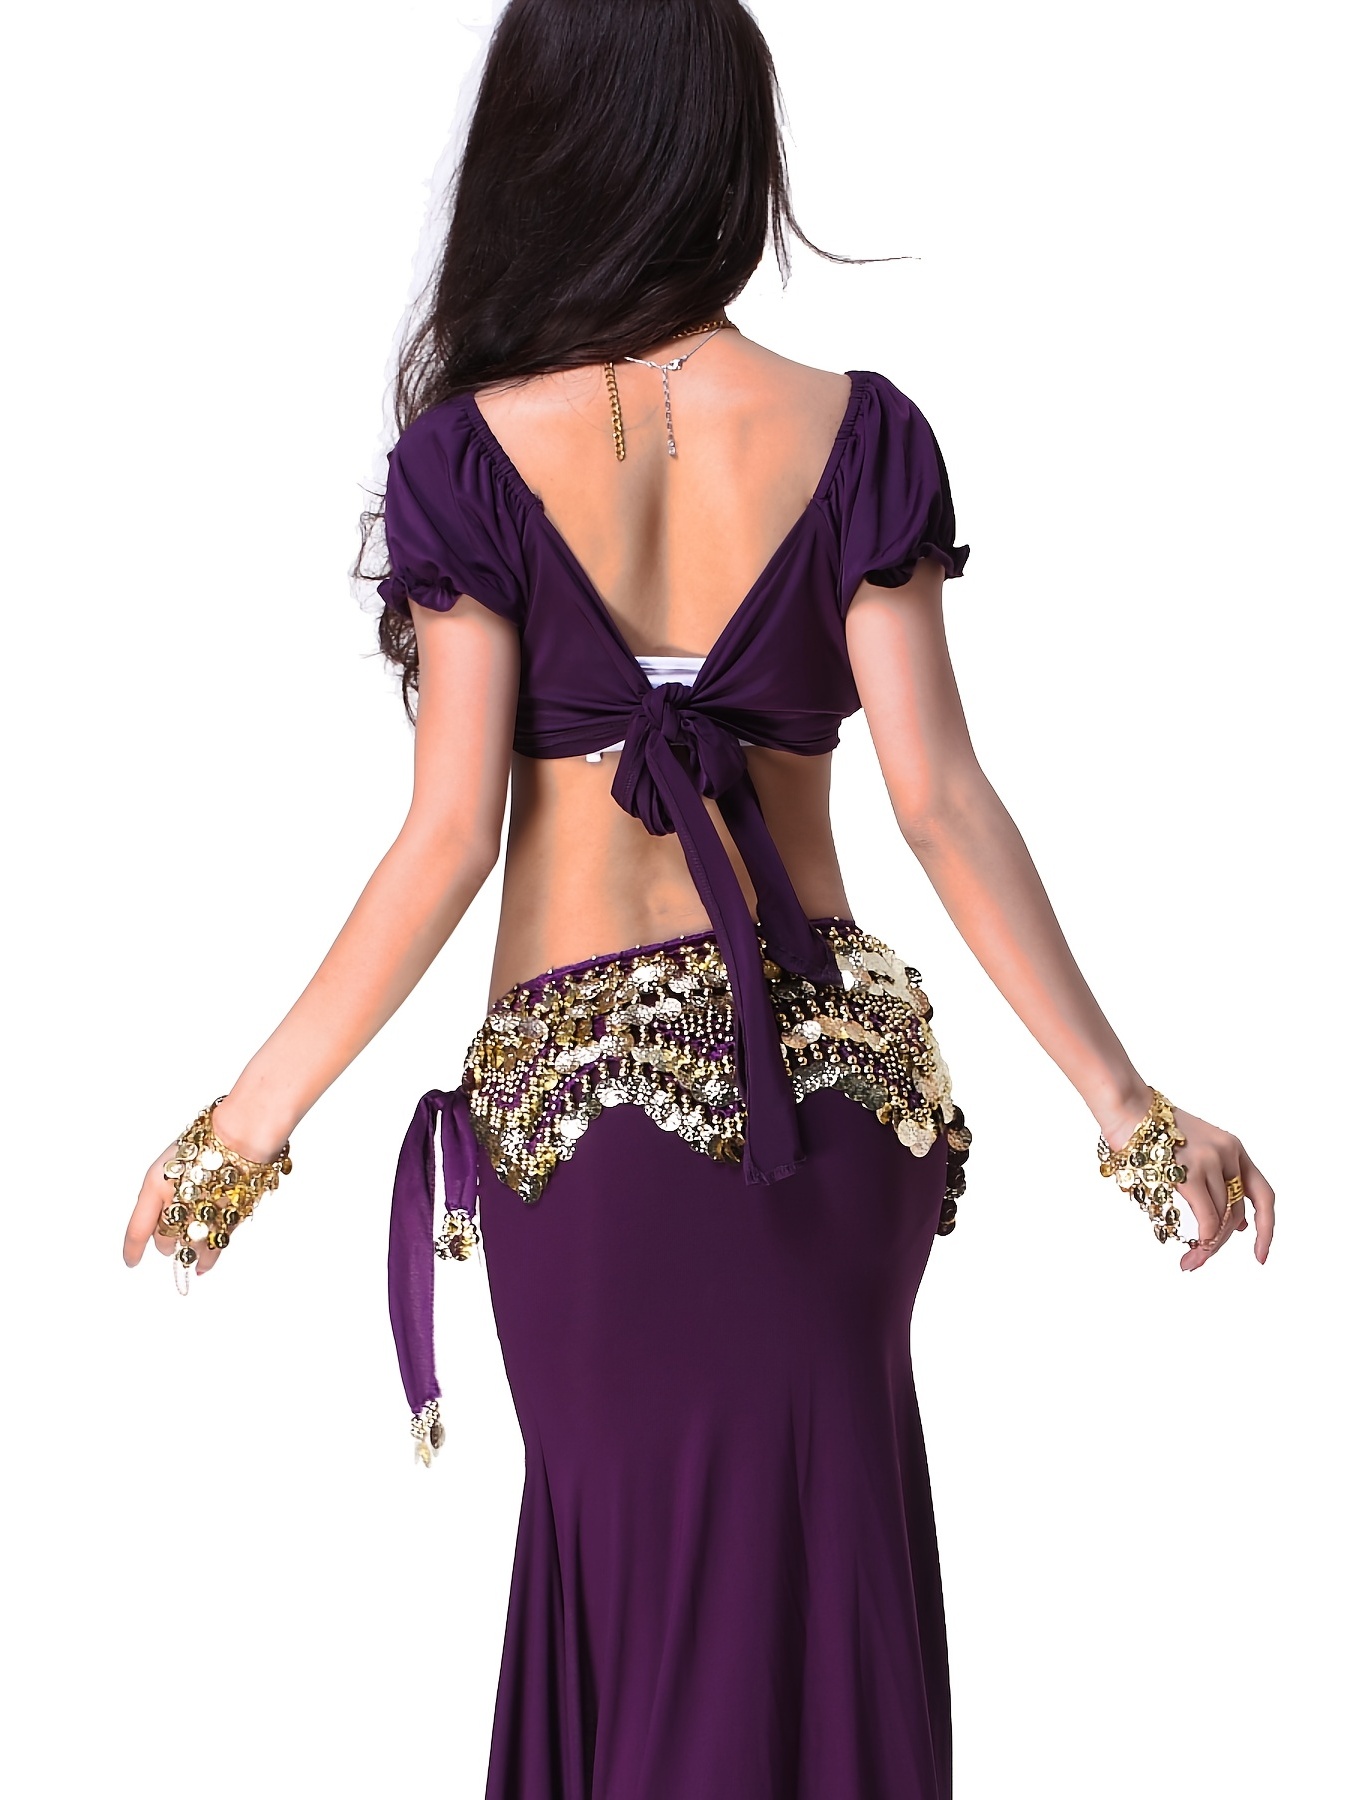 belly dance hip scarf fantasy larp wrap skirt cosplay accessory